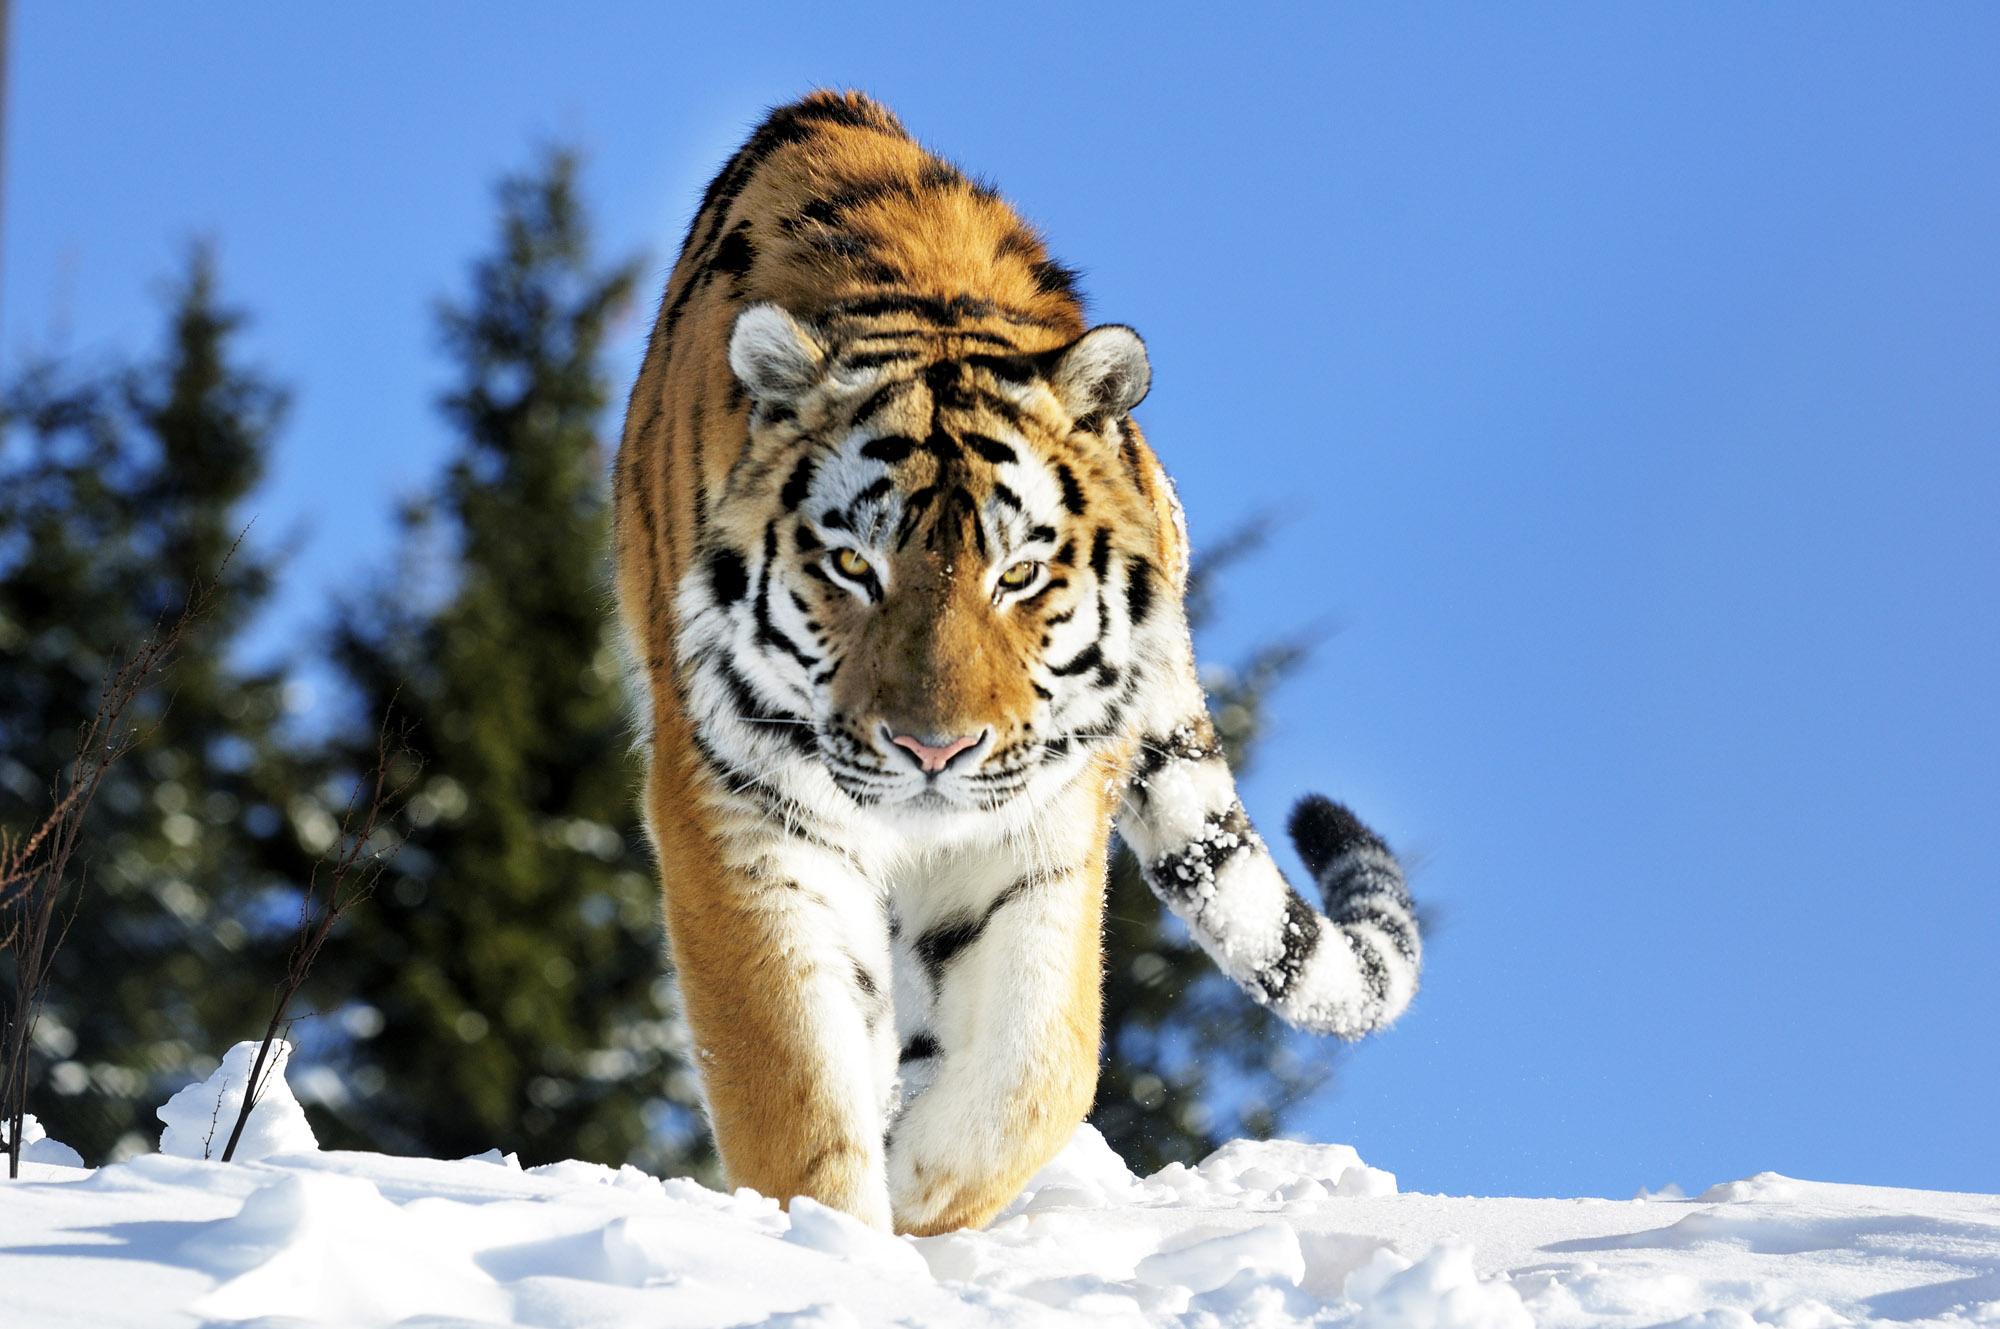 The Siberian tiger is one of the world's largest wild cats and can reach up to 350 kilograms in weight and averages 3 to 4 metres in length. – © Grönklittsgruppen